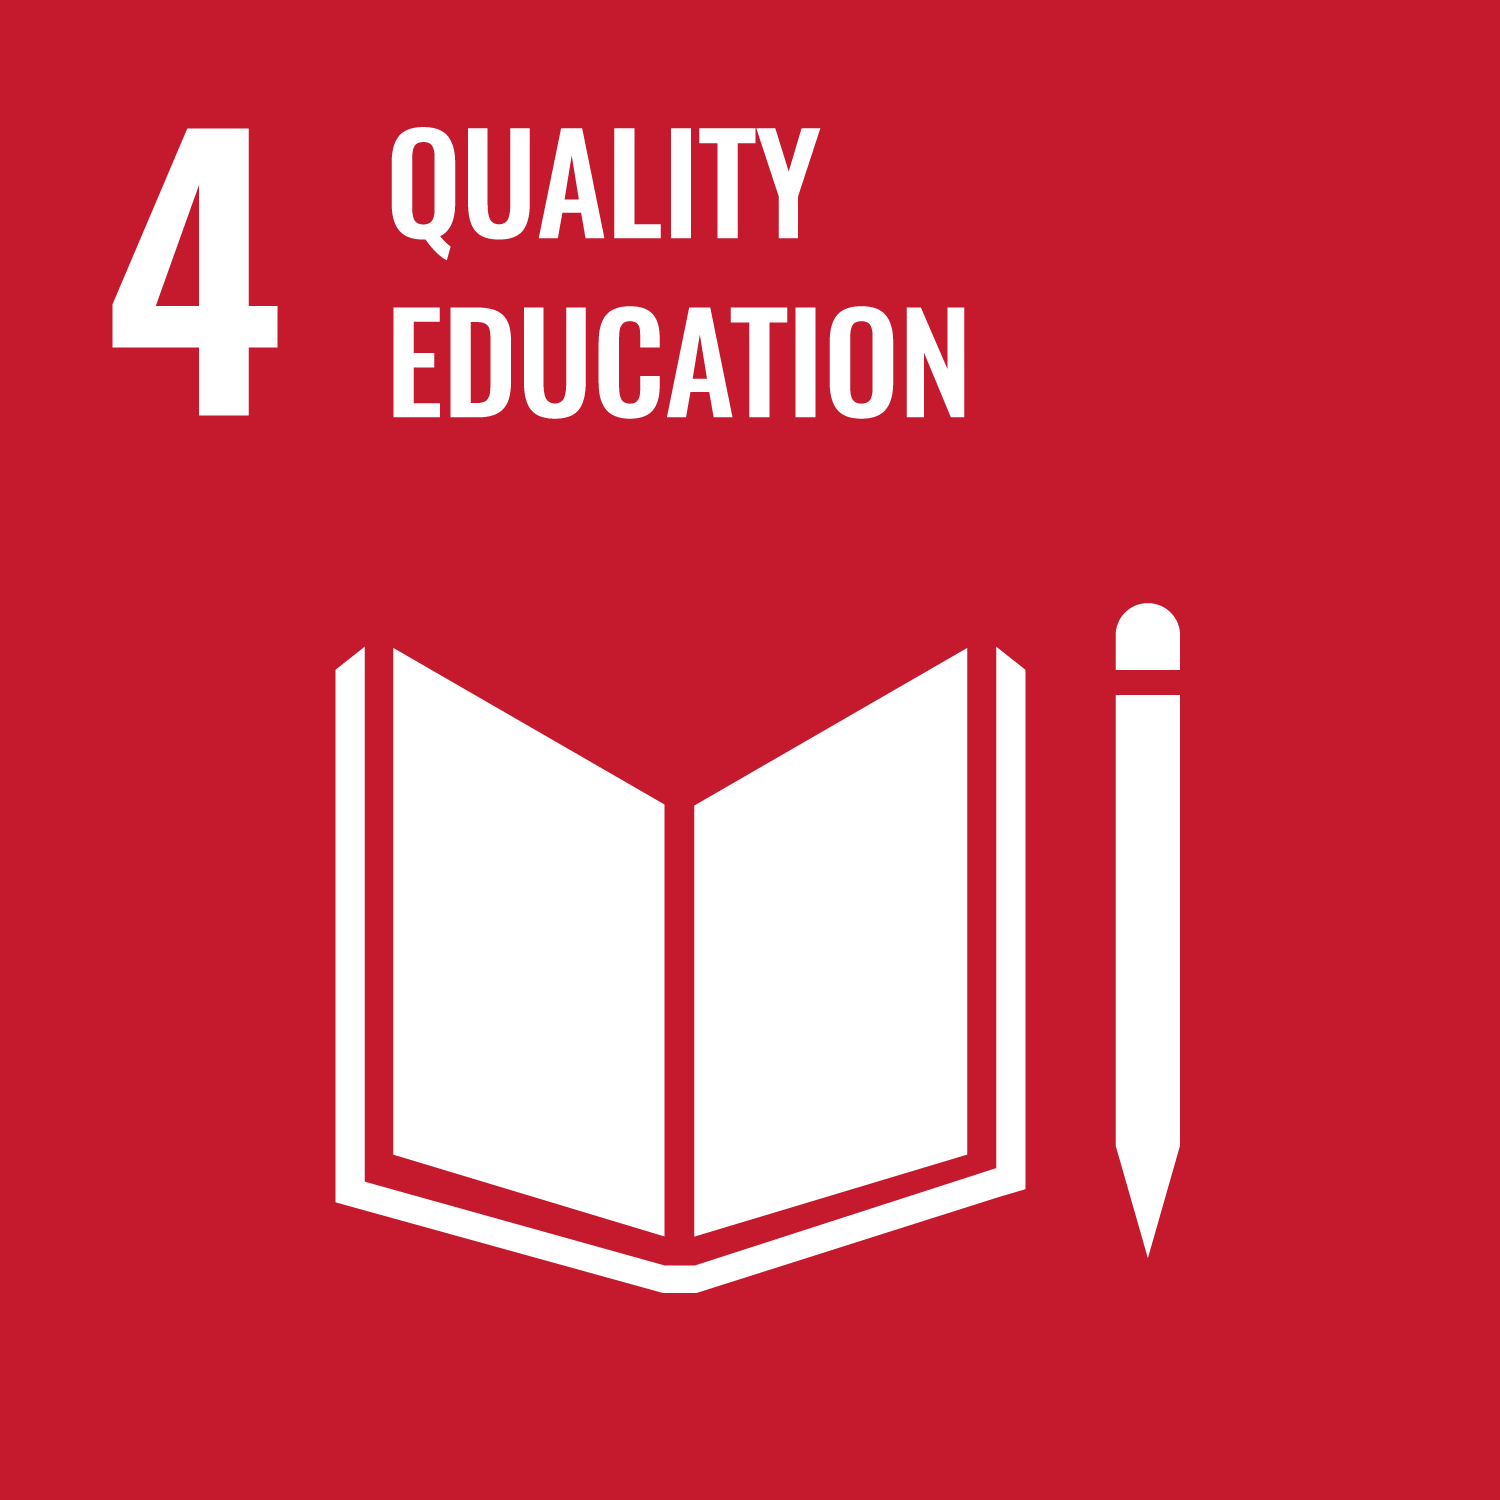 United Nations SDG goal for Quality Education